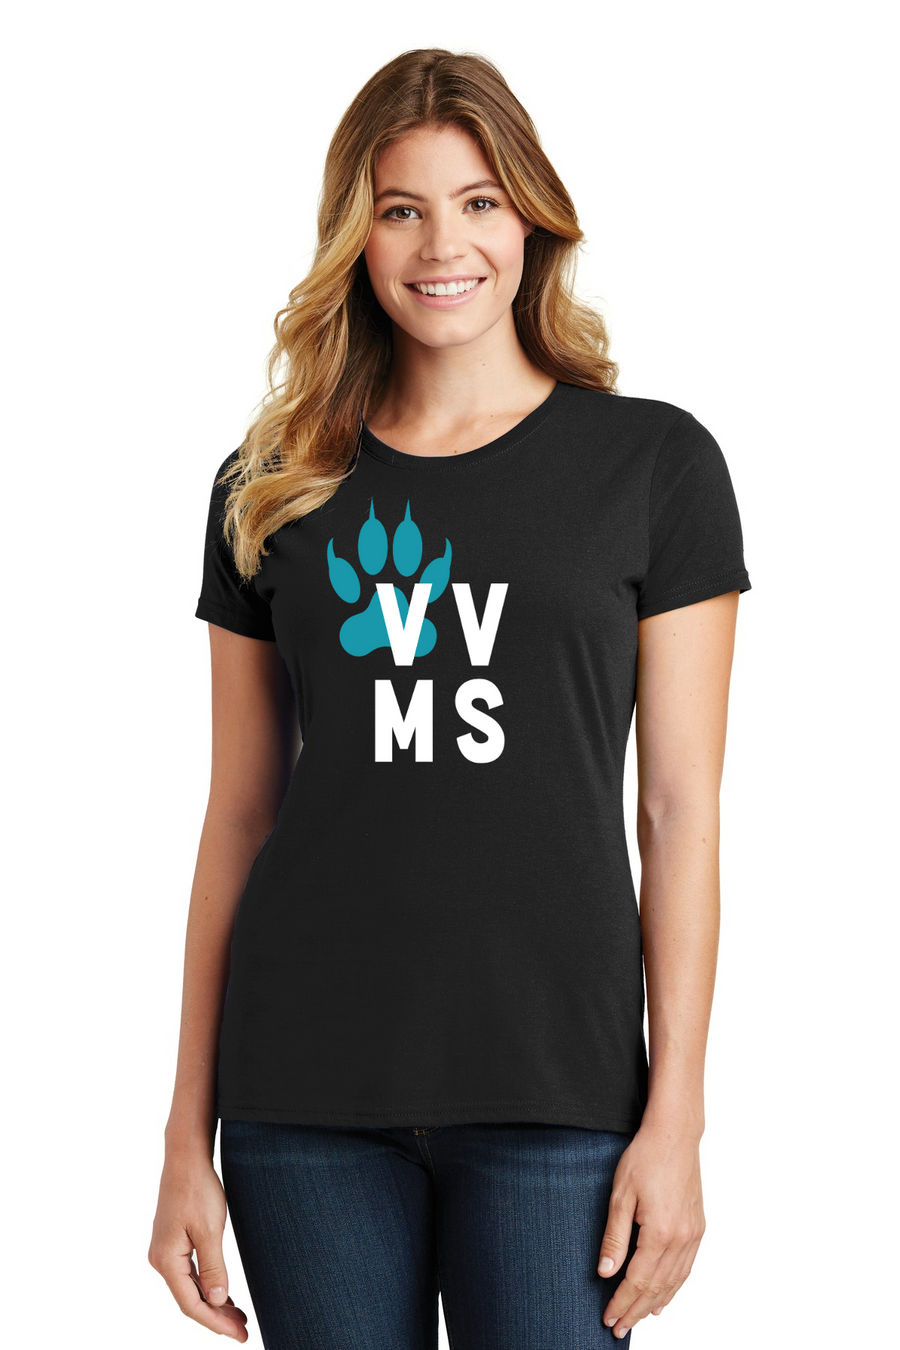 Valley View Middle School On-Demand Spirit Wear-Port and Co Ladies Favorite Shirt VVMS Logo